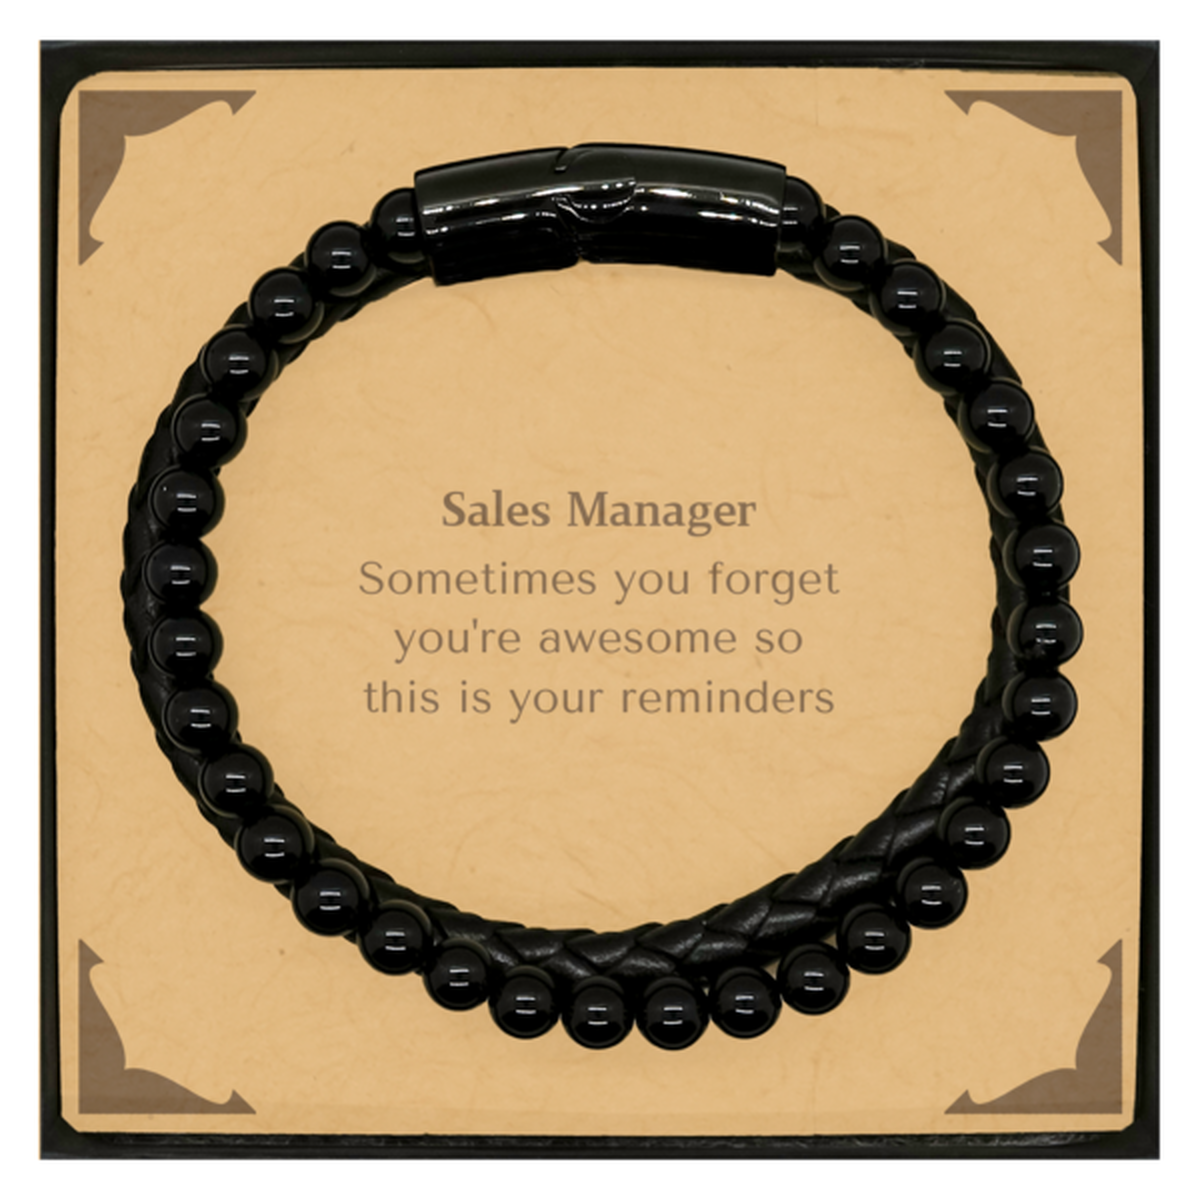 Sentimental Sales Manager Stone Leather Bracelets, Sales Manager Sometimes you forget you're awesome so this is your reminders, Graduation Christmas Birthday Gifts for Sales Manager, Men, Women, Coworkers